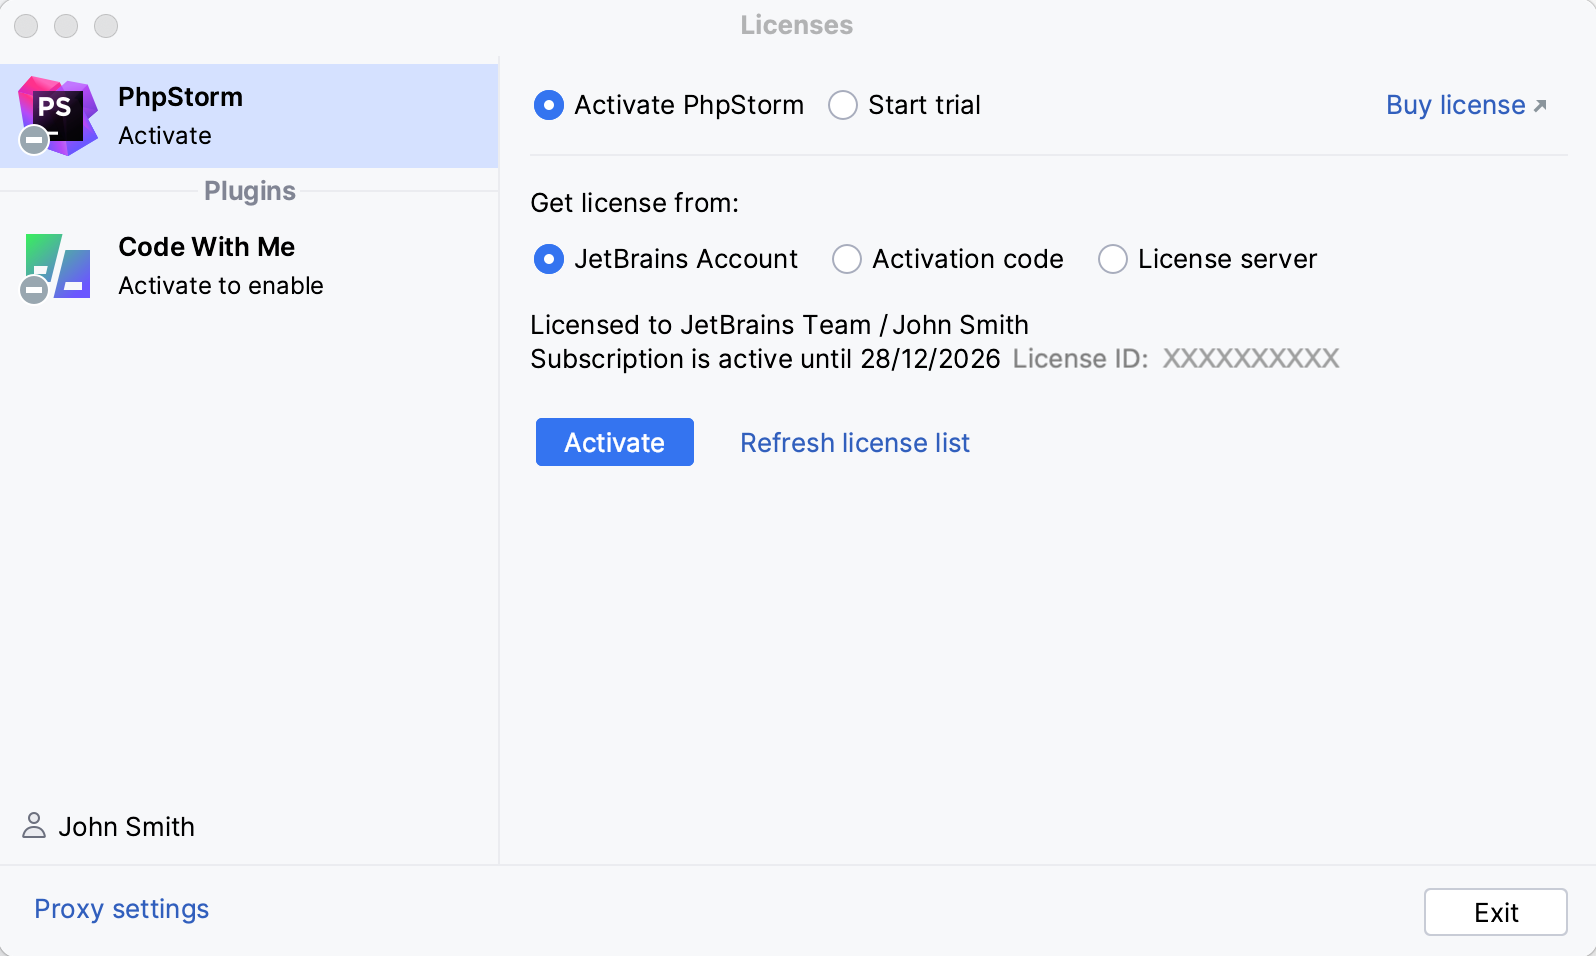 Activate PhpStorm license with a JetBrains Account